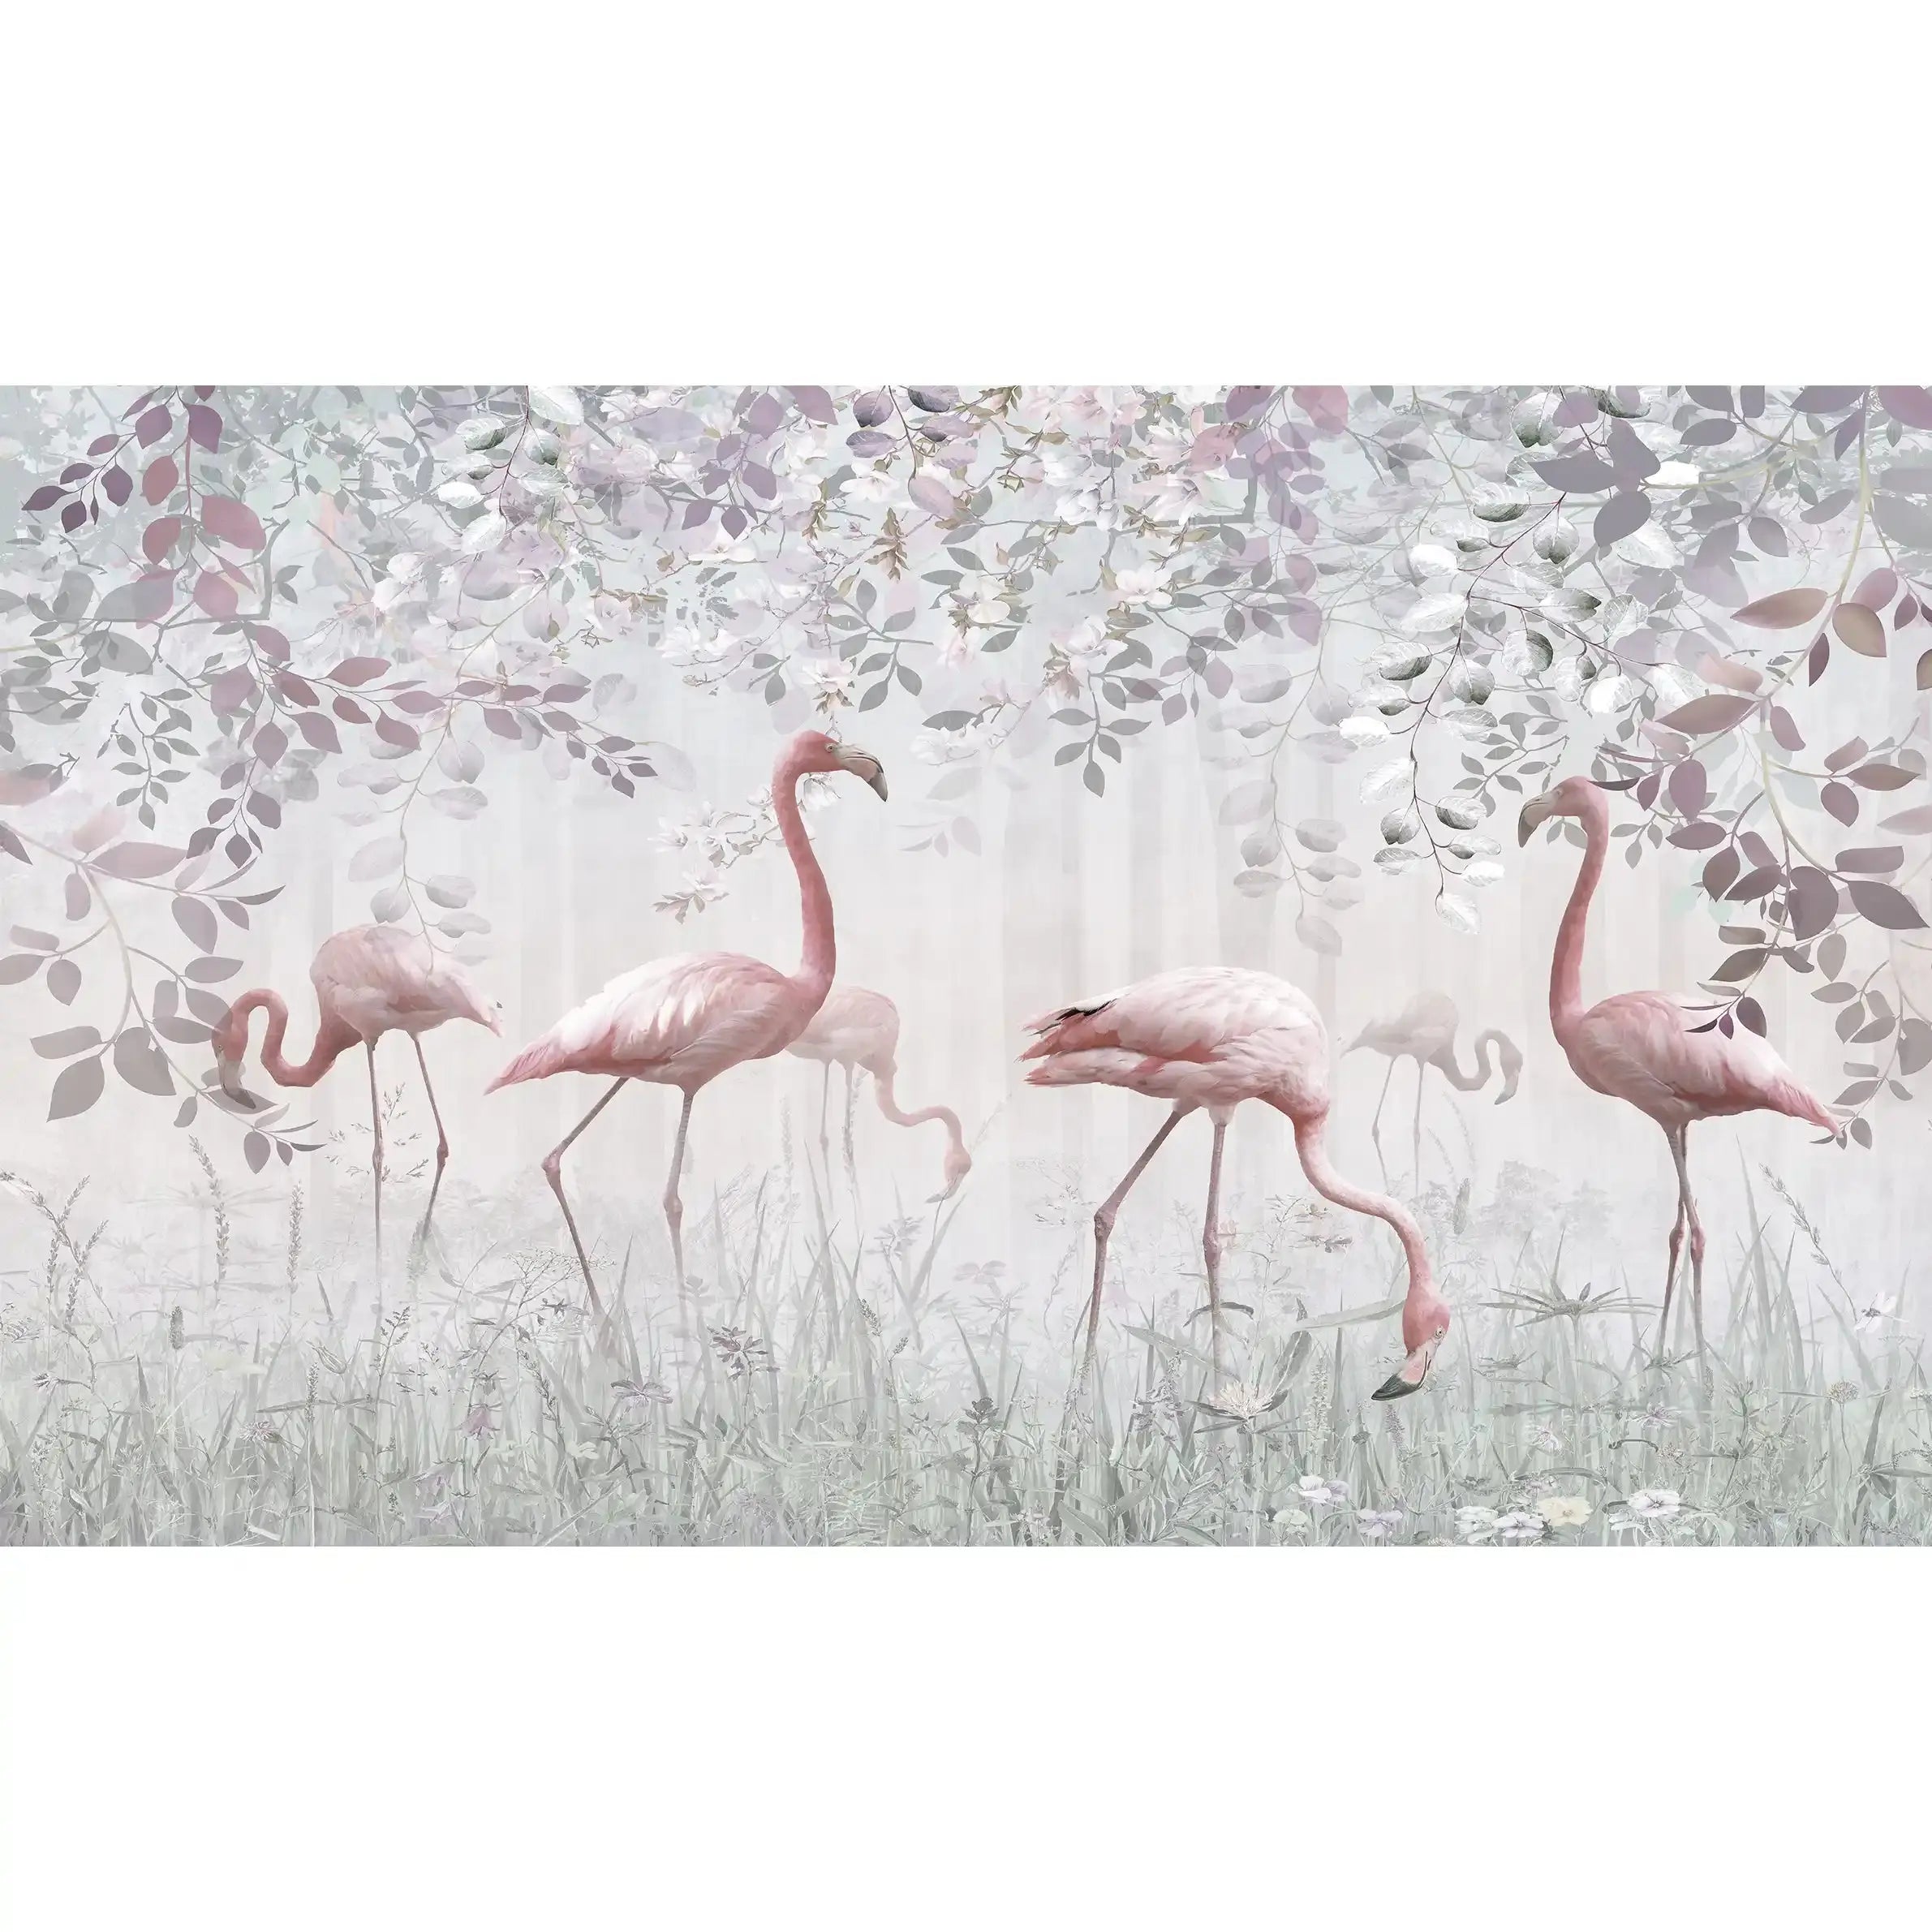 3054-B / Peel and Stick Wallpaper with Pink FlamingoBoho WallPaper for Wall Decor, Easy Install, Removable for Nursery, Bathroom, Bedroom - Artevella